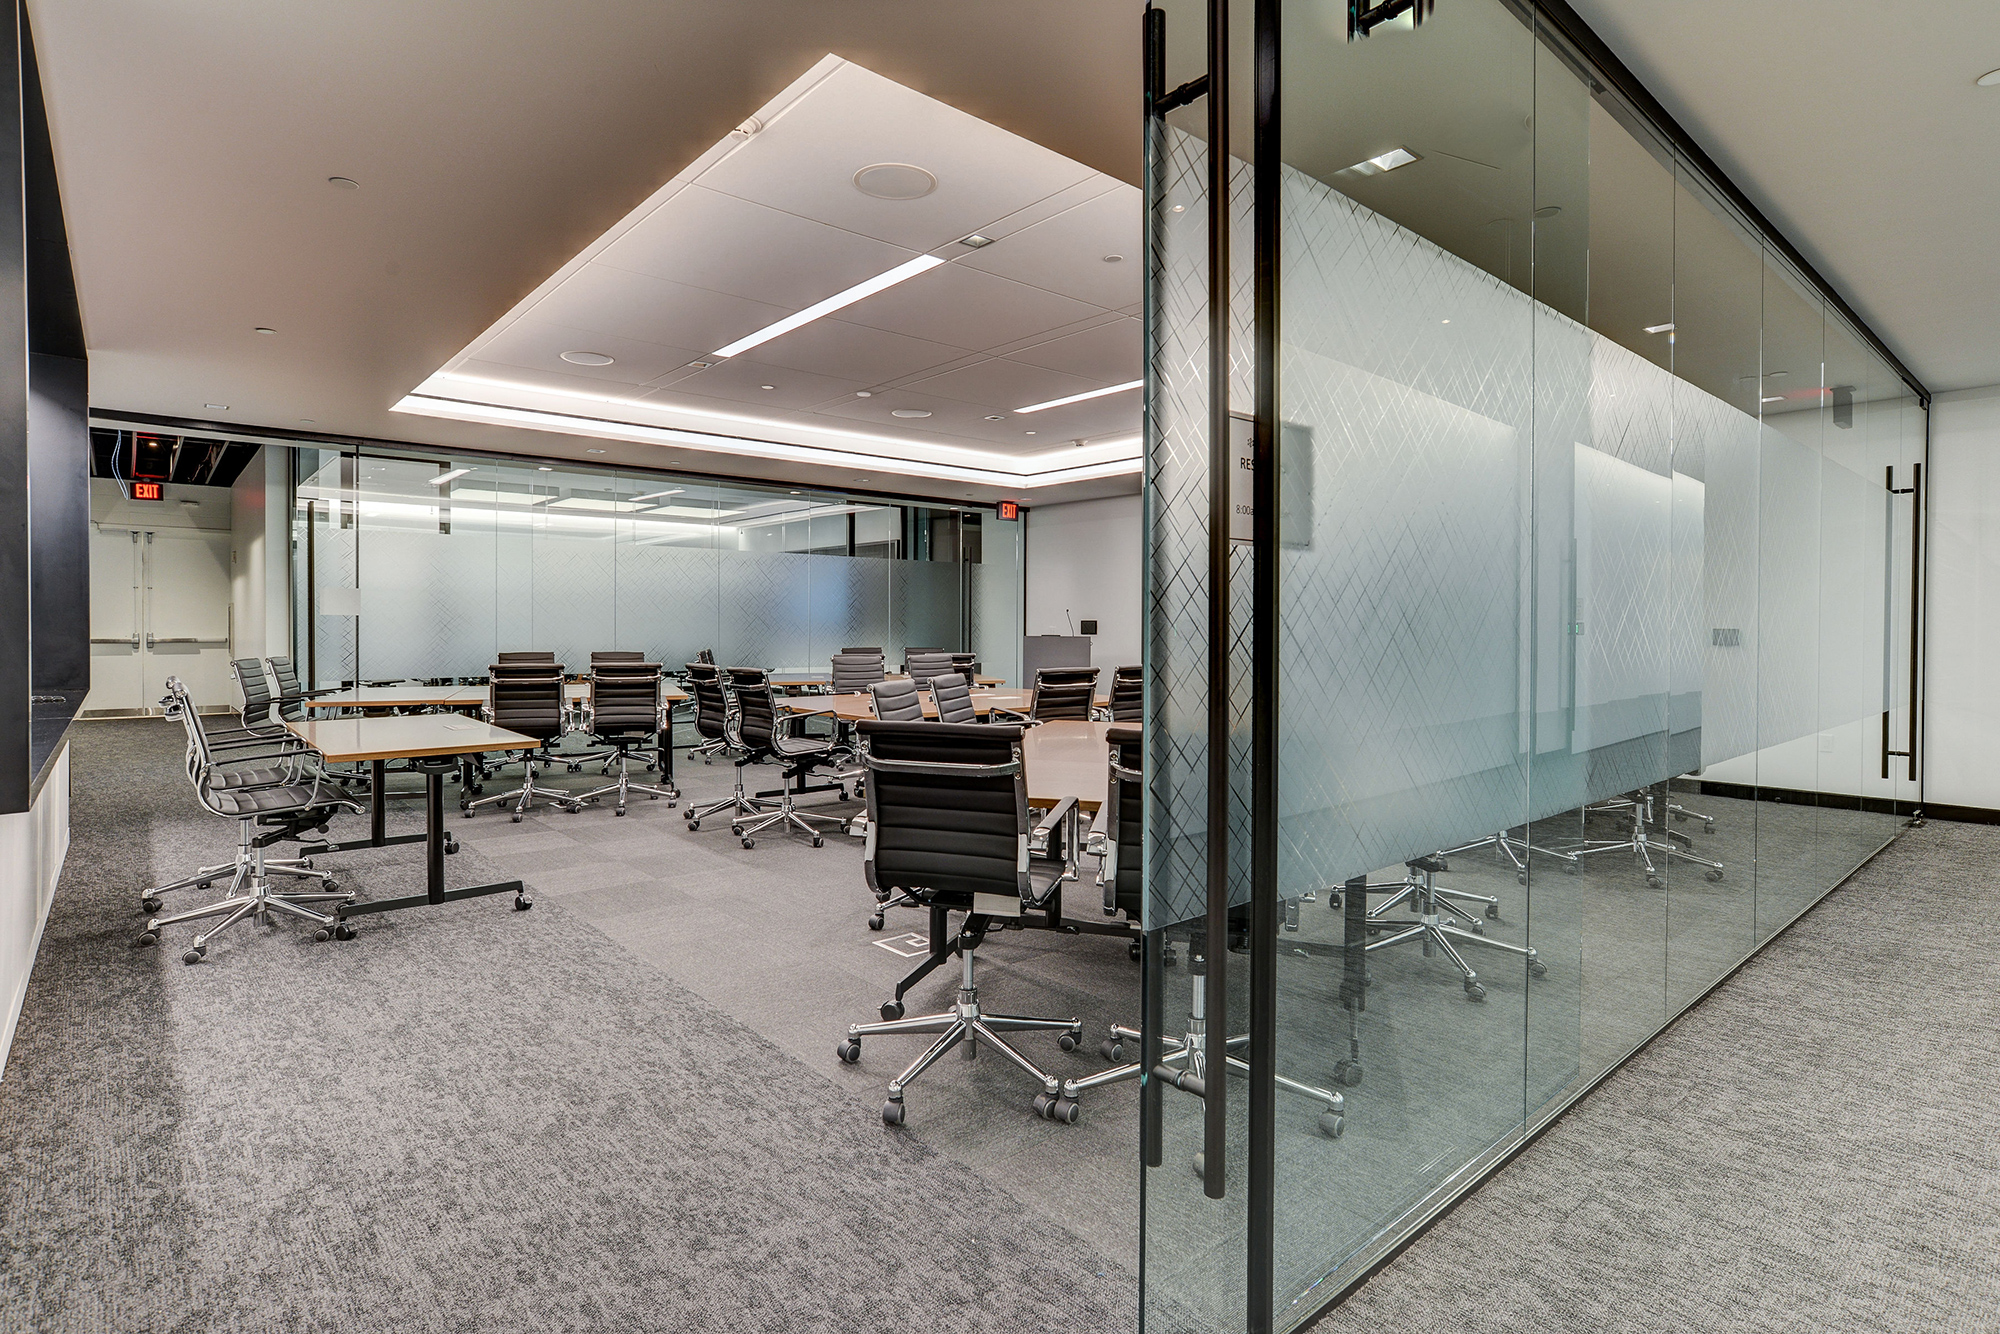 Conference Room with Glass Walls, seats and tables